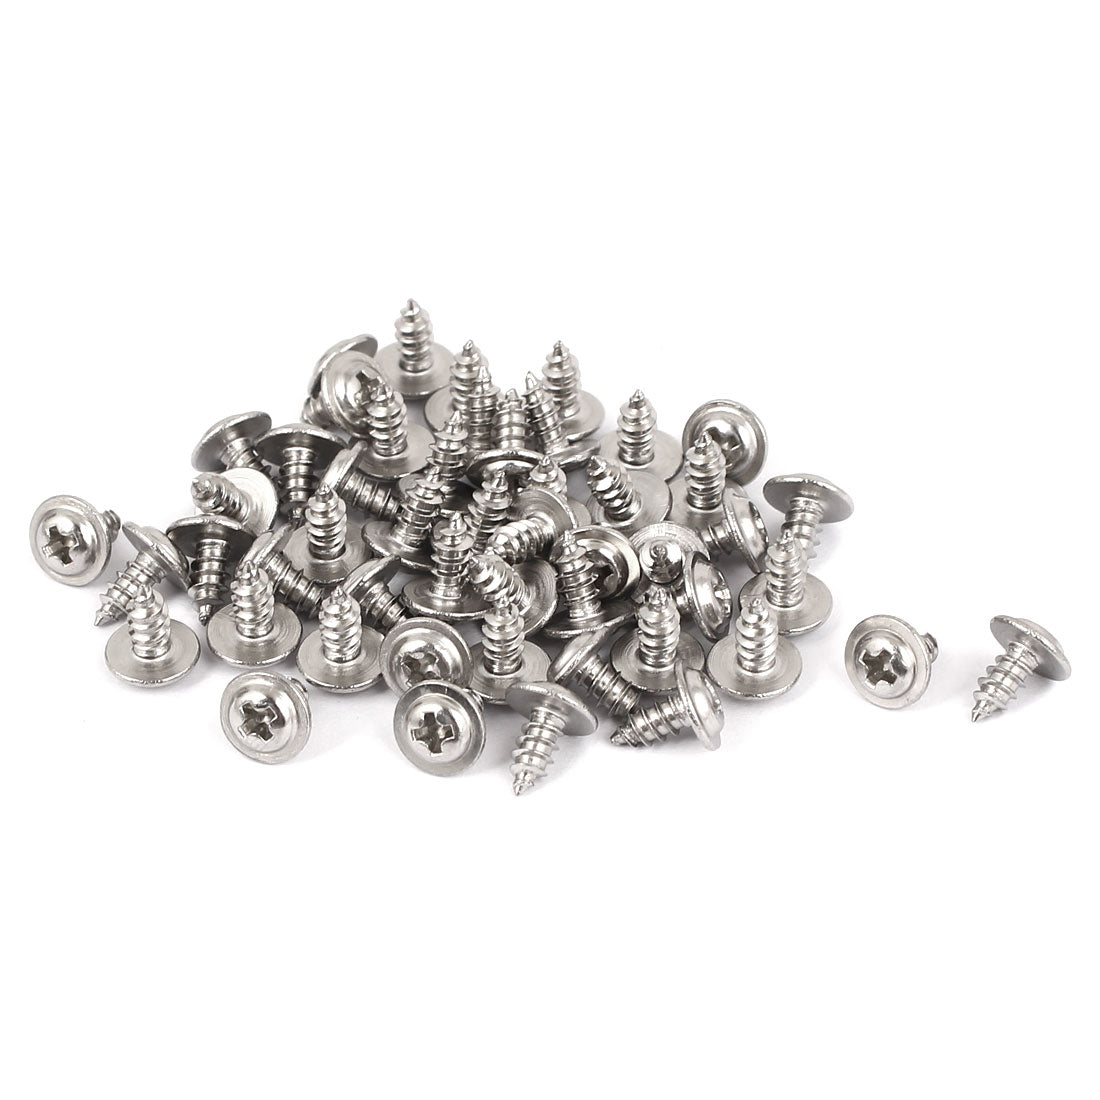 uxcell Uxcell 2.6mmx6mm Thread 304 Stainless Steel Phillips Pan Head Self Tapping Screws 50pcs